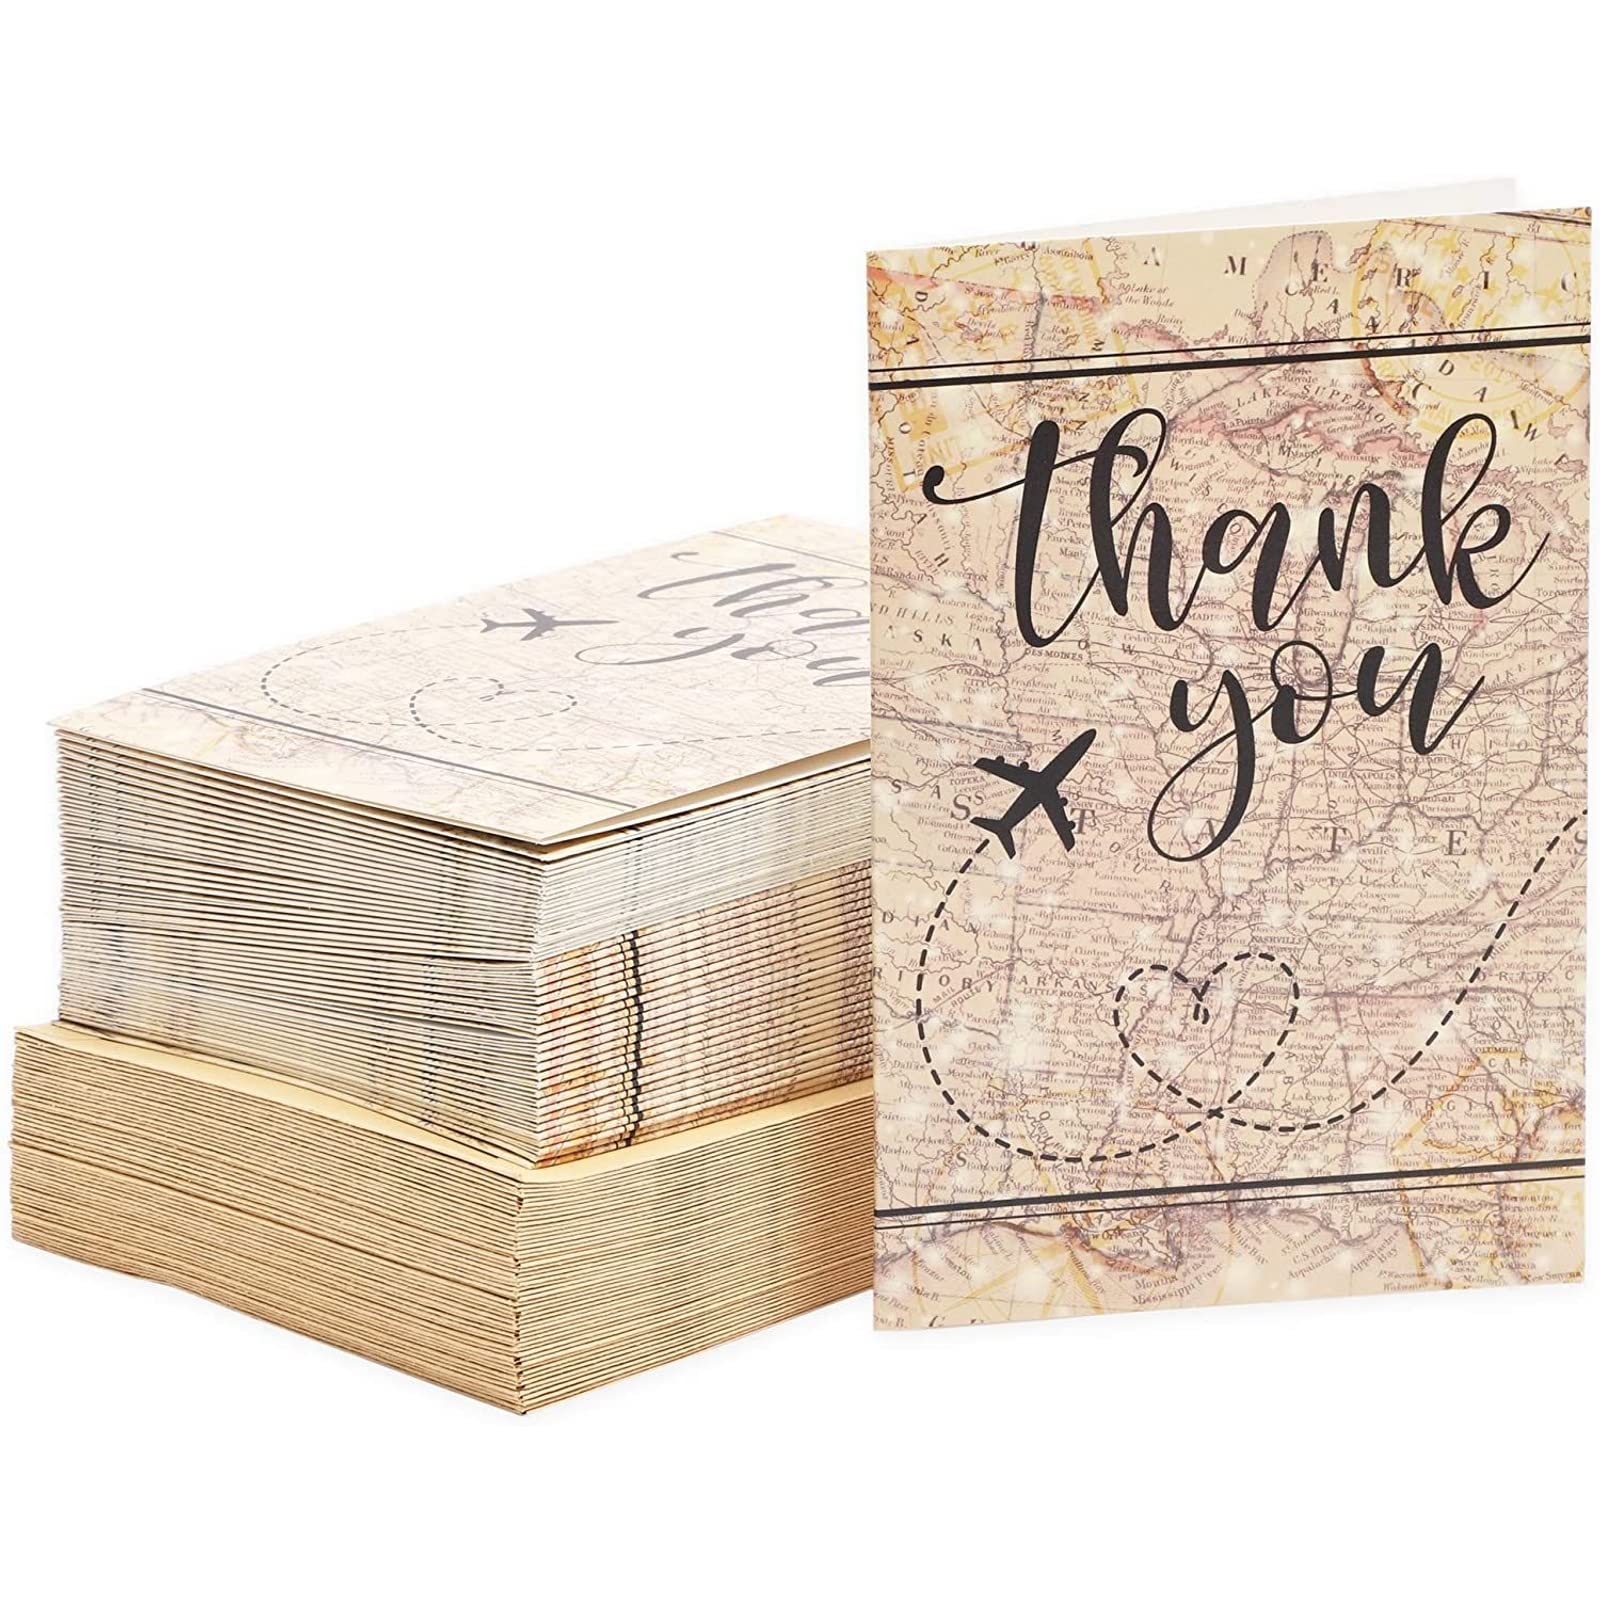 Pipilo Press 48 Pack Travel Thank You Cards with Envelopes, 4x6 Notecards with Airplane, Map, and Adventure Design (Brown)